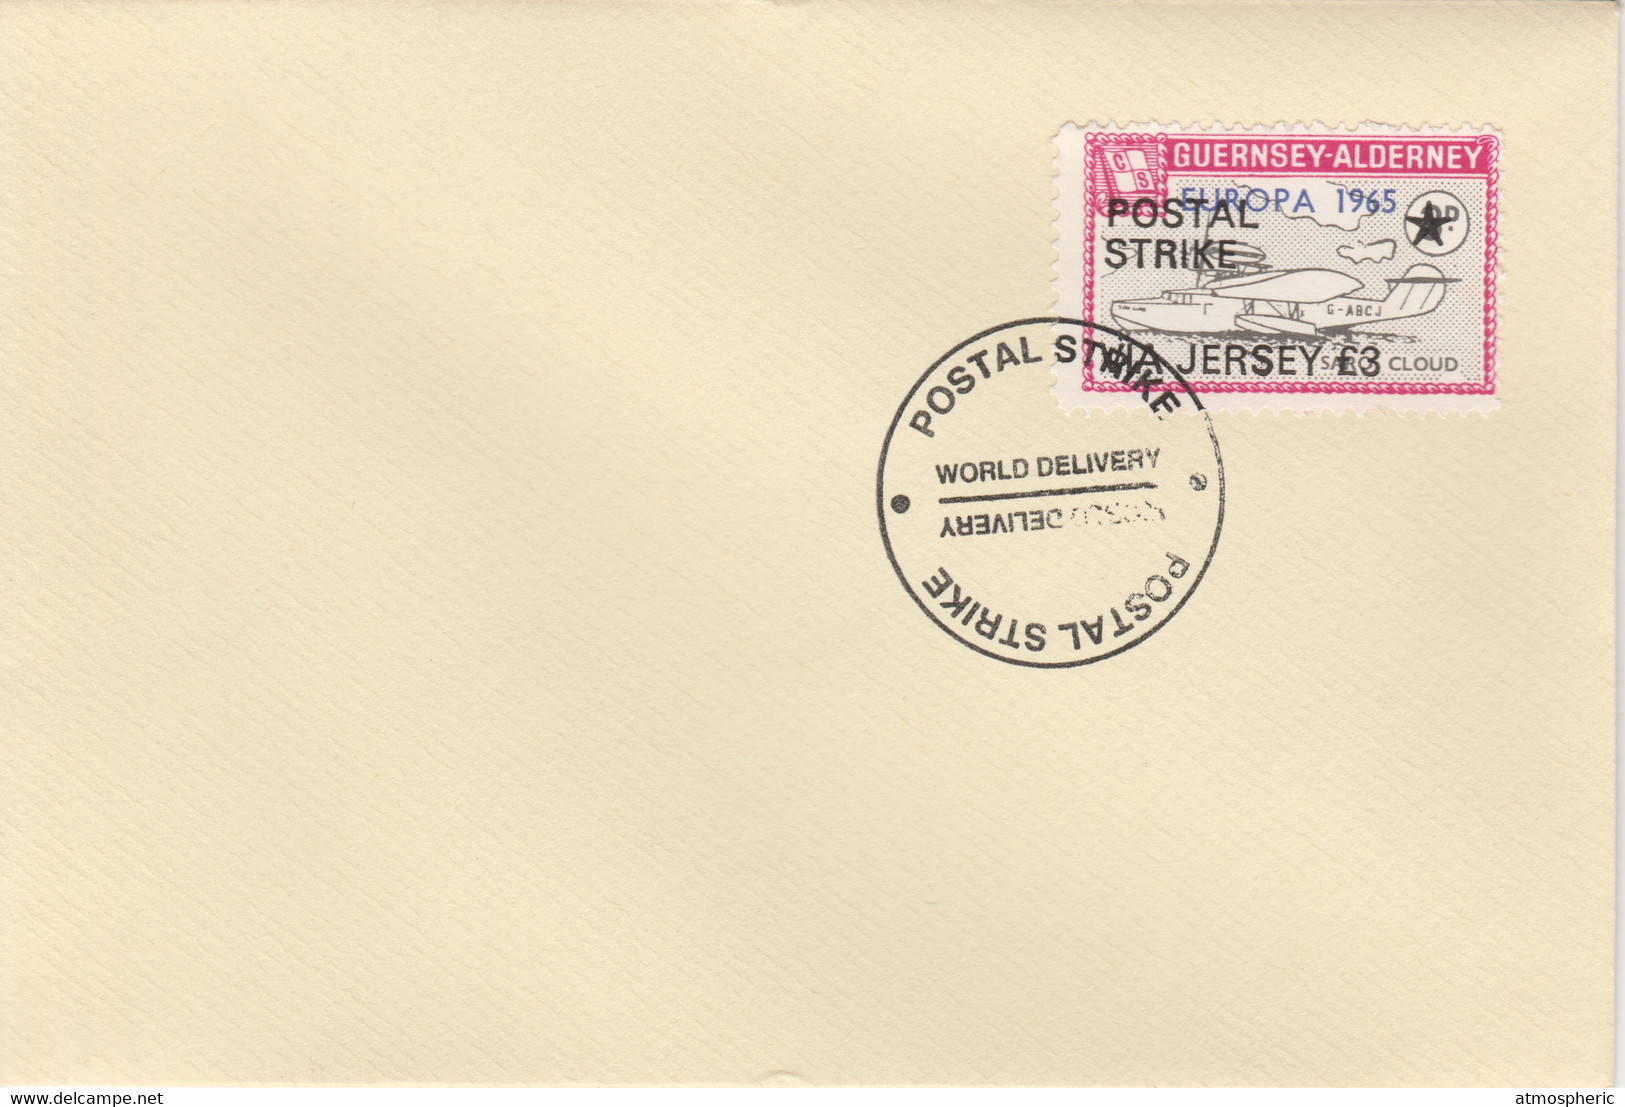 Guernsey - Alderney 1971 Postal Strike Cover To Jersey Bearing Flying Boat Saro Cloud 3d Overprinted Europa 1965 - Ohne Zuordnung